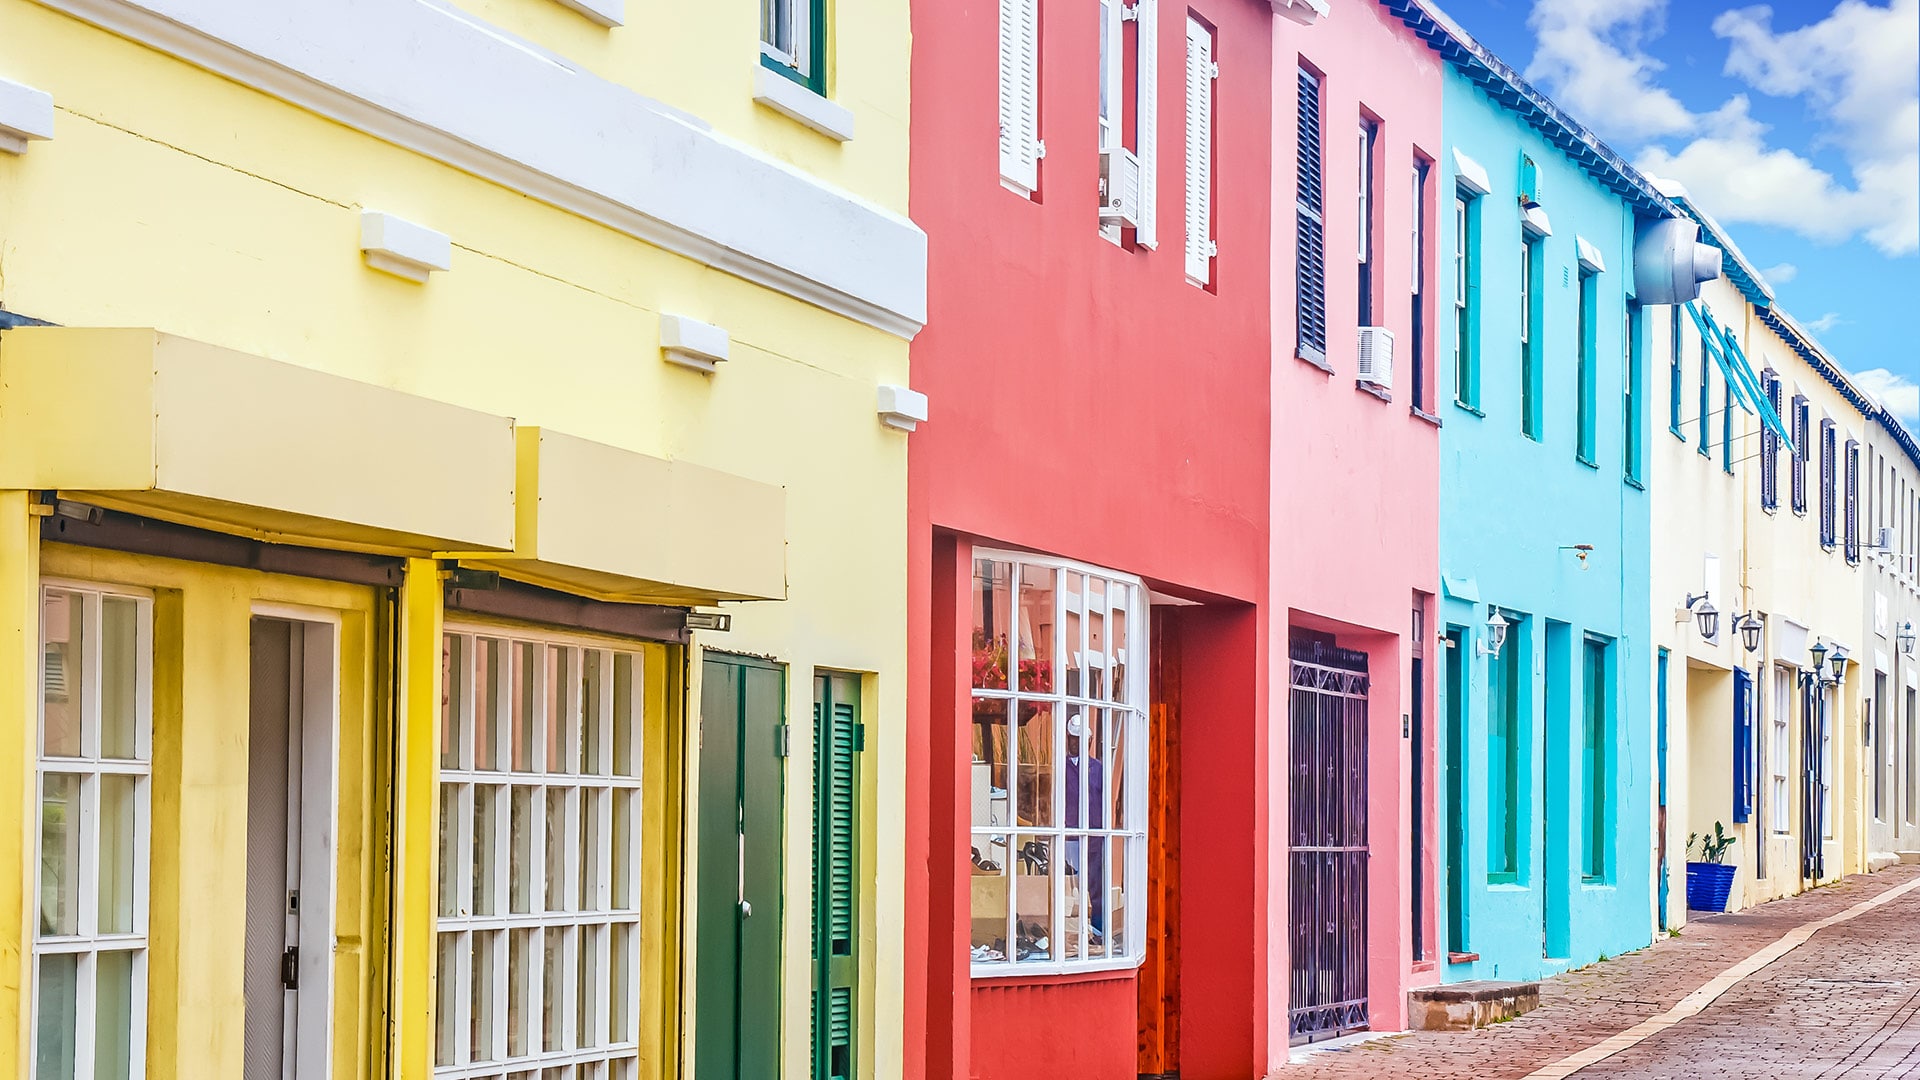 Colorful shop fronts in Bermuda